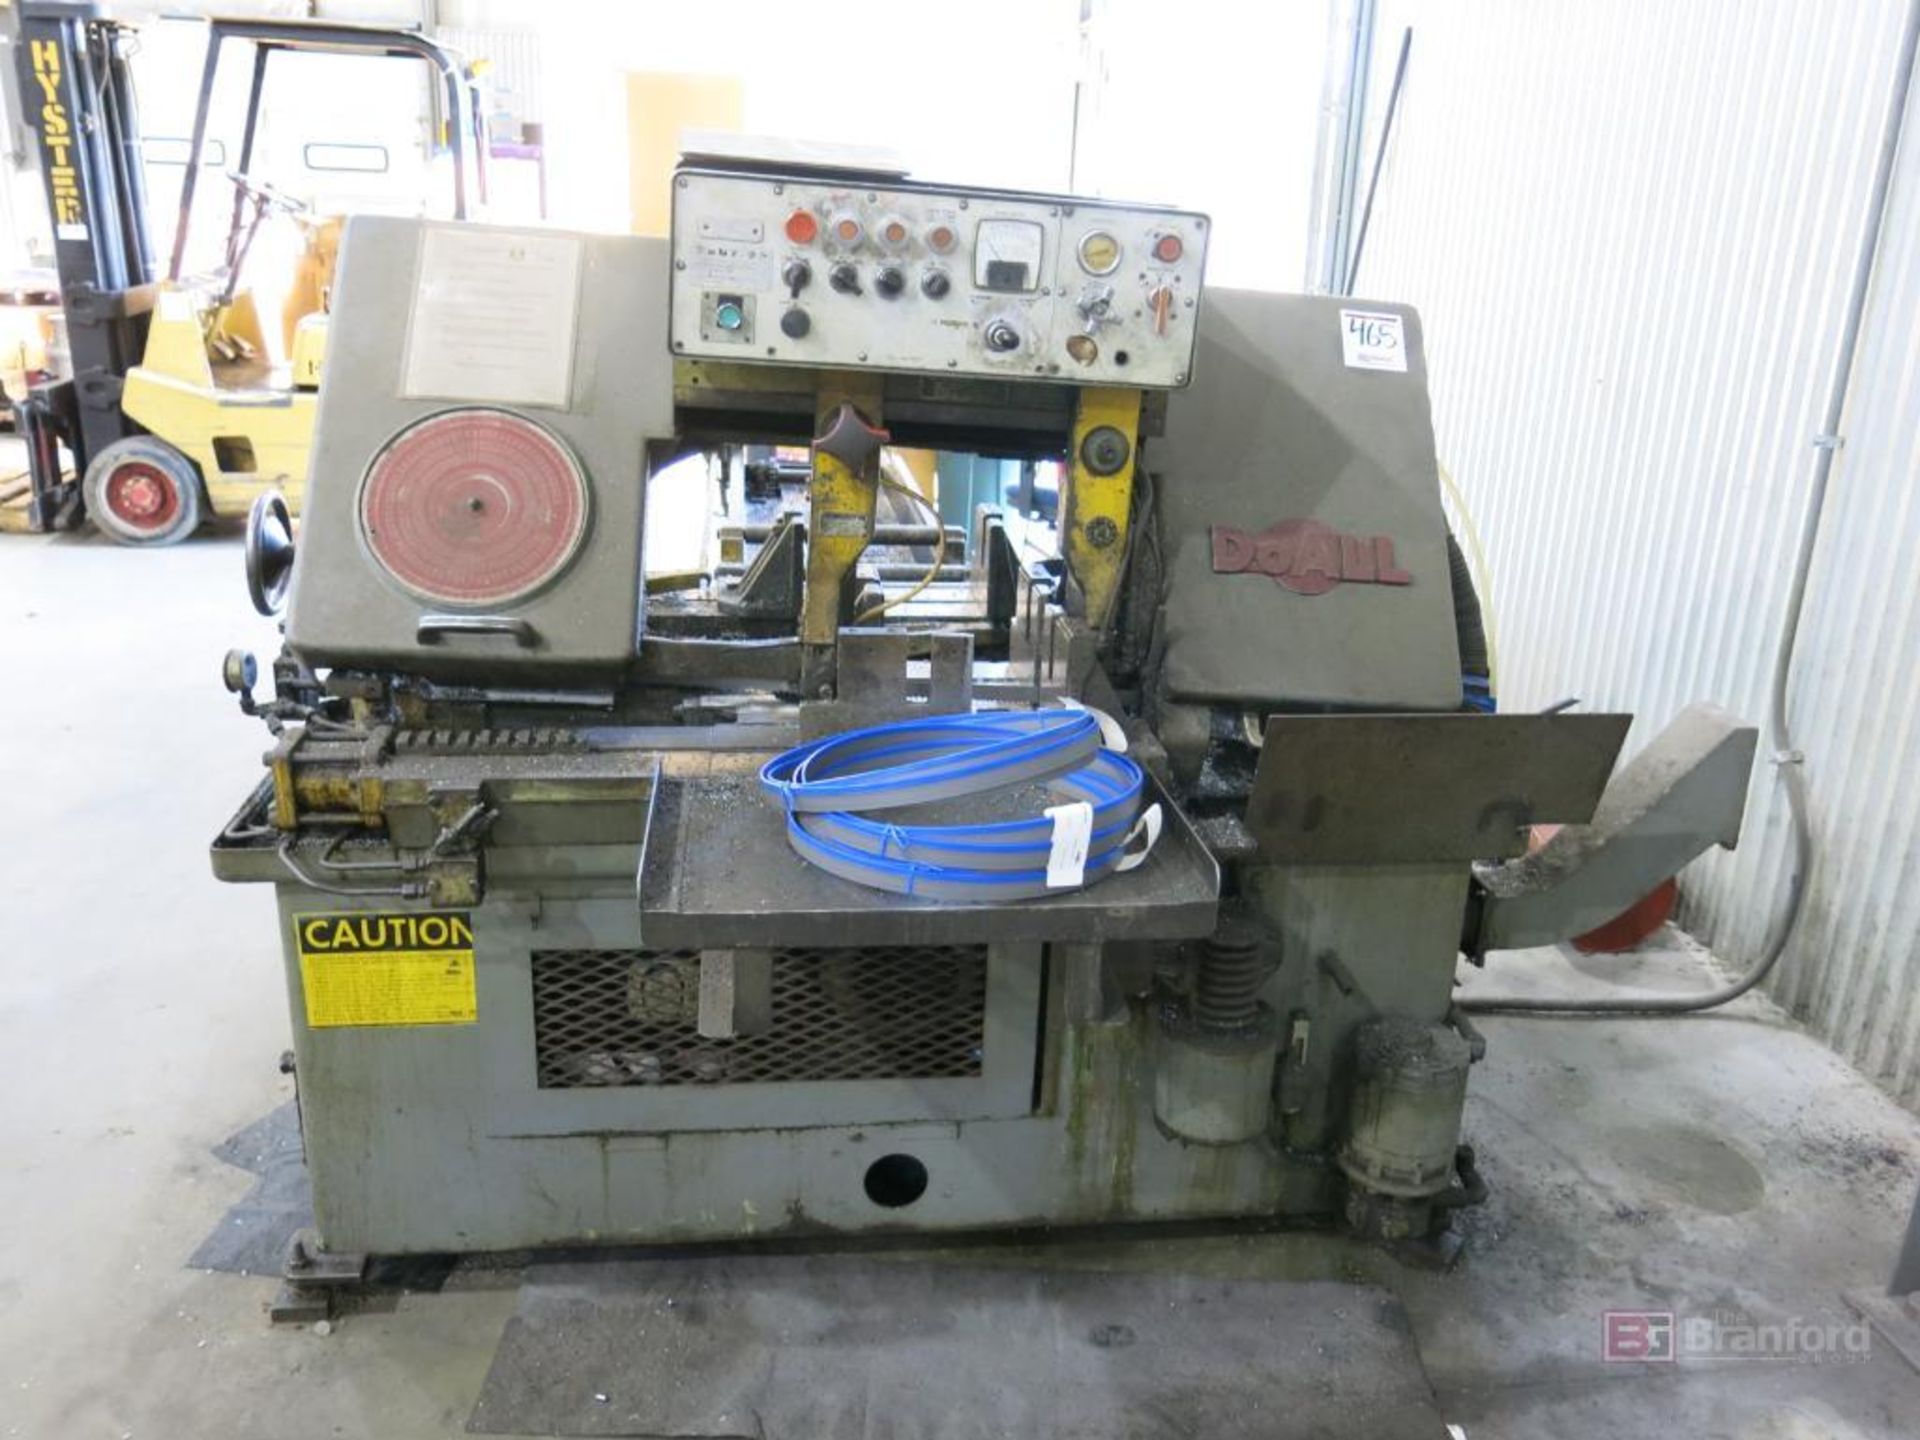 DoAll Model C80 Continuous Blade Horizontal Band Saw